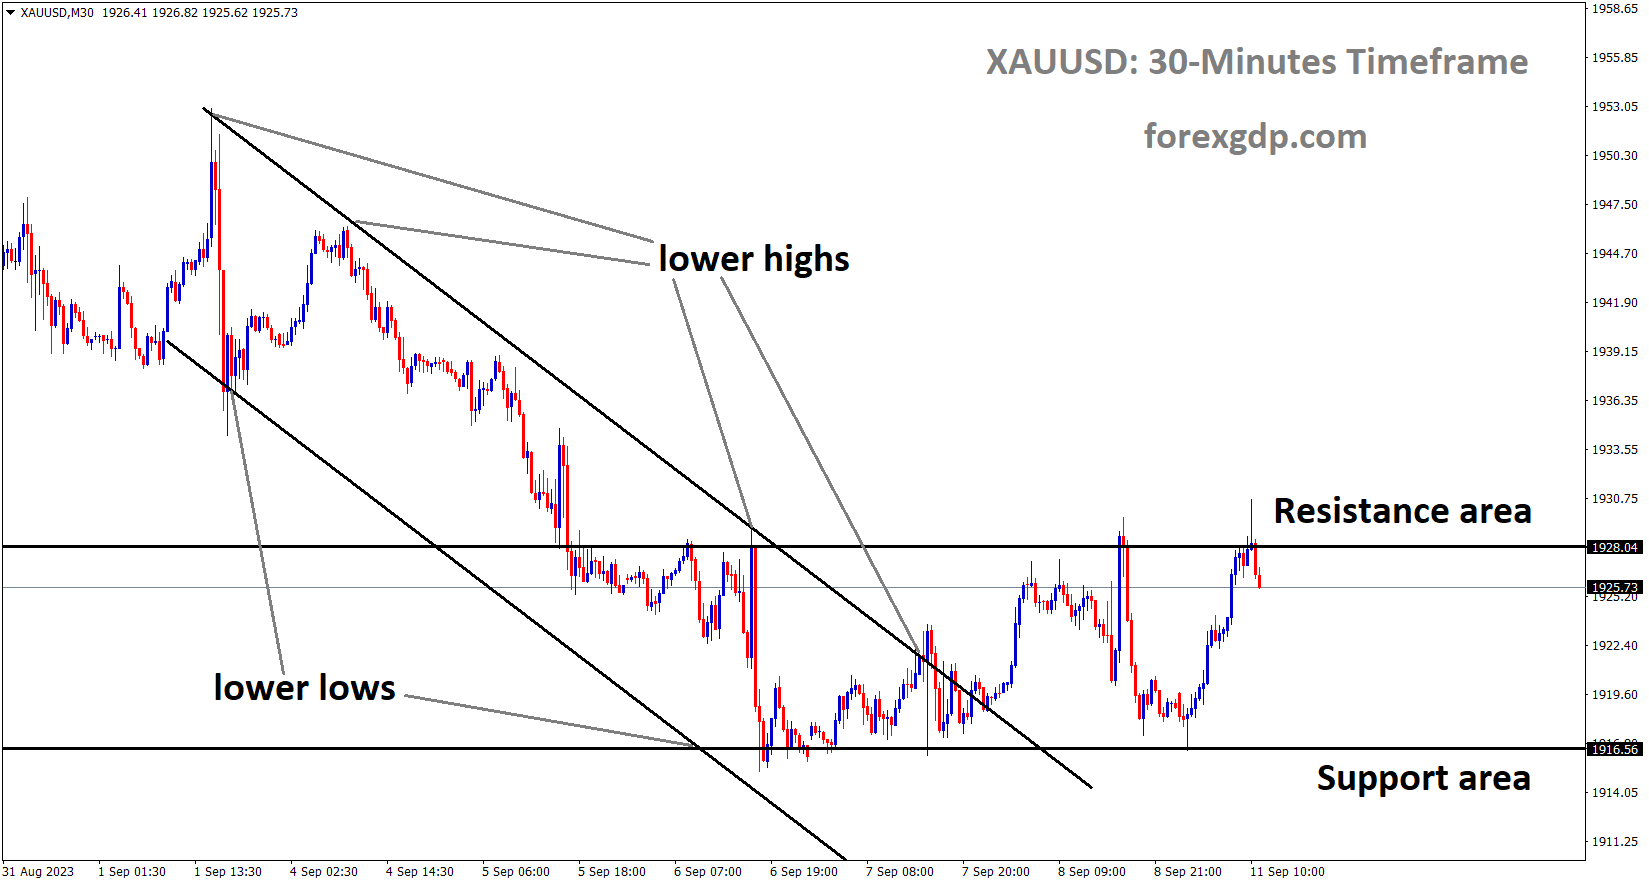 XAUUSD Gold price is moving in the Descending channel and the market has fallen from the resistance area of the minor Box pattern